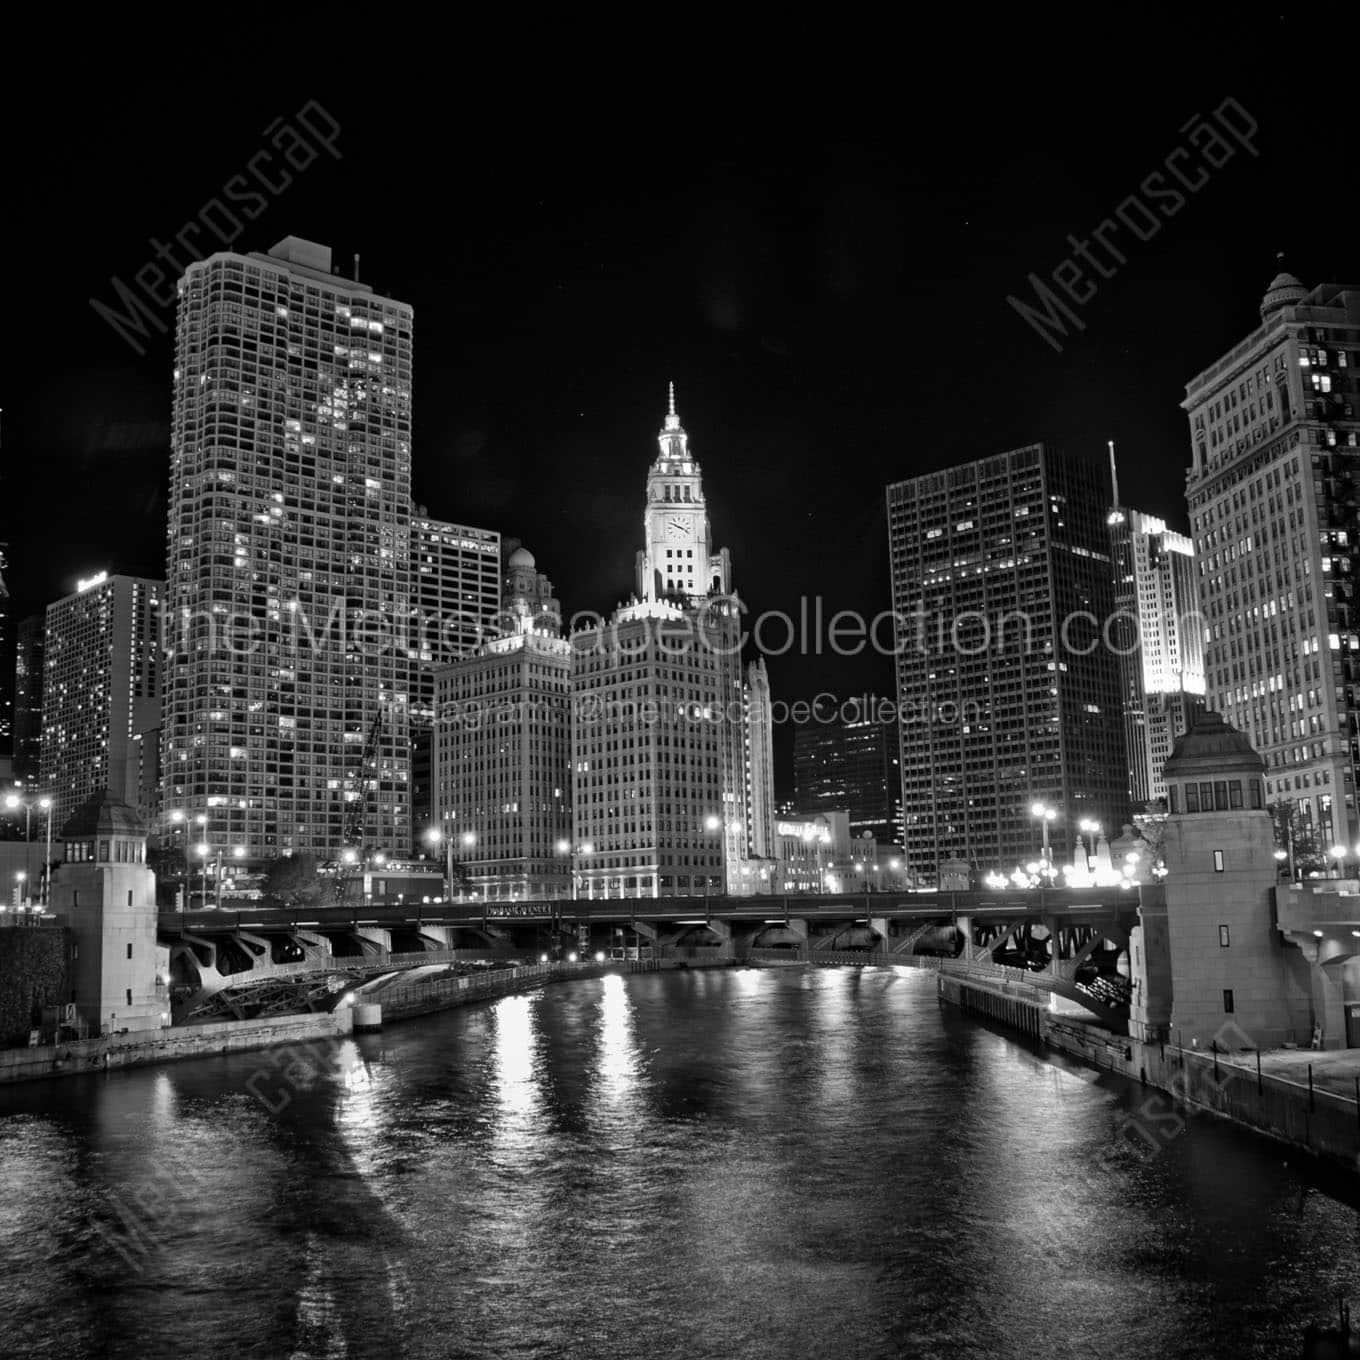 wrigley building and chicago river at night Black & White Wall Art